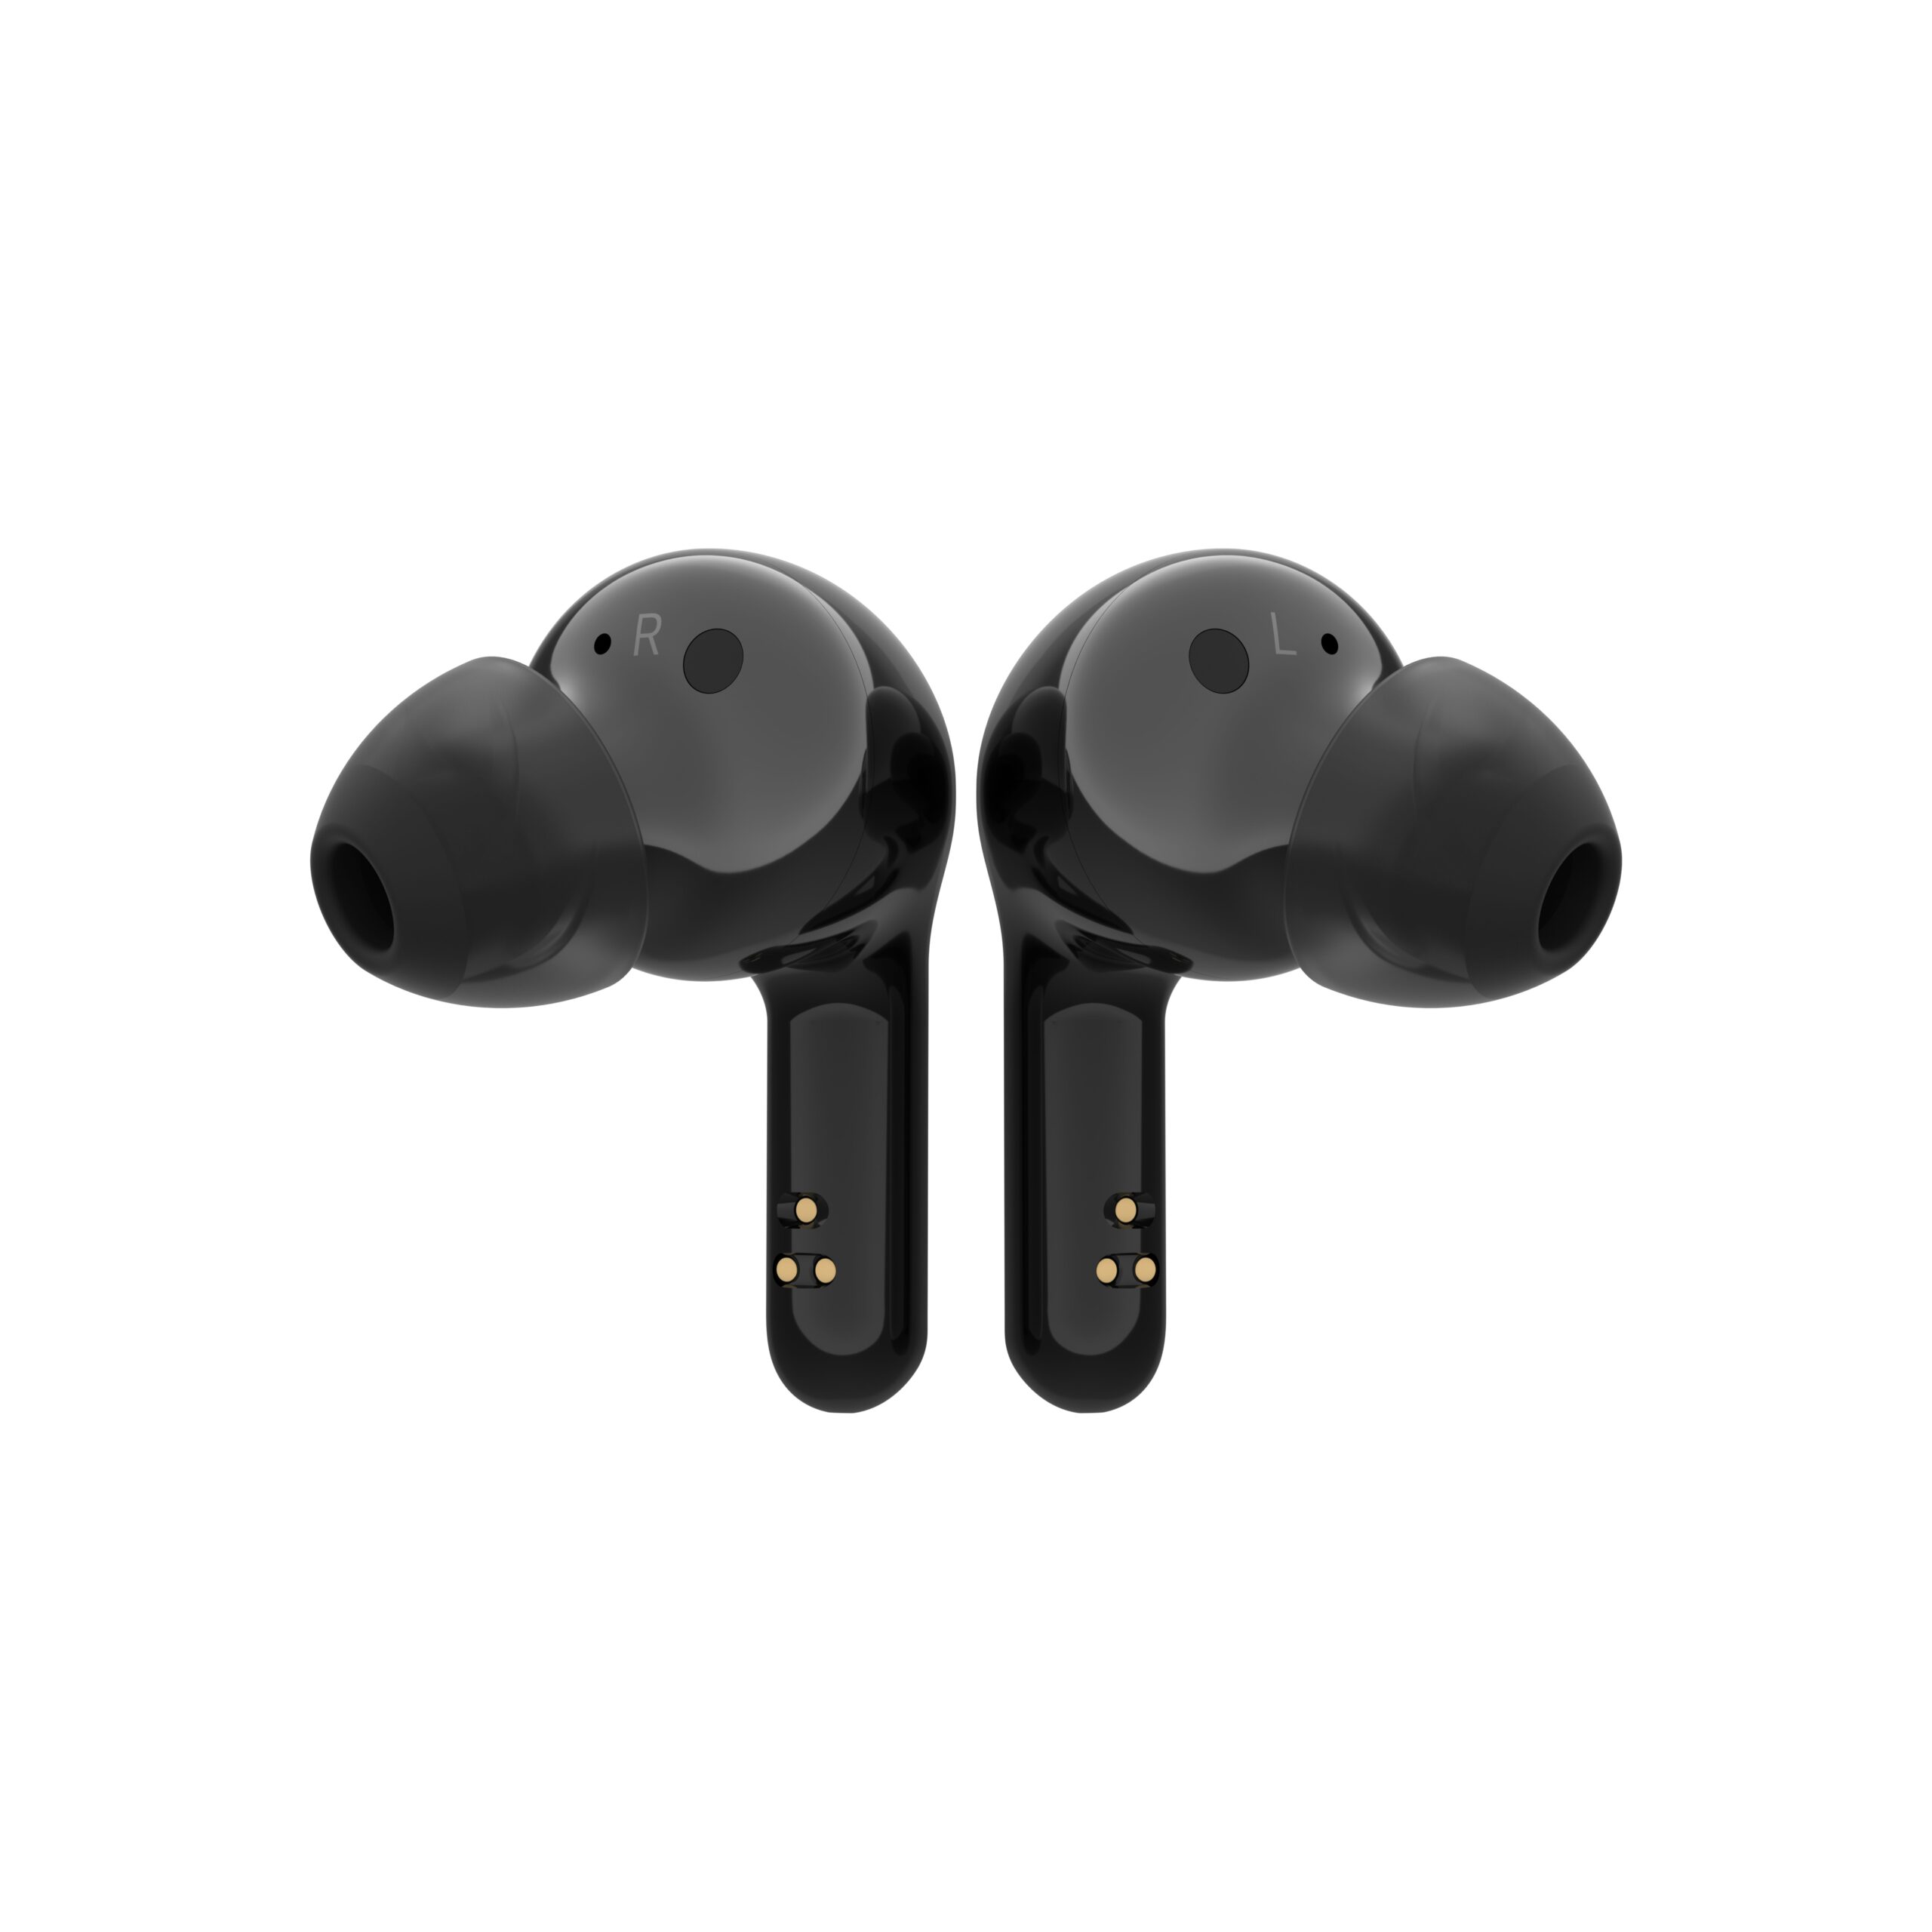 LG launches upgraded TONE Free Wireless Earbuds with Active Noise Cancellation